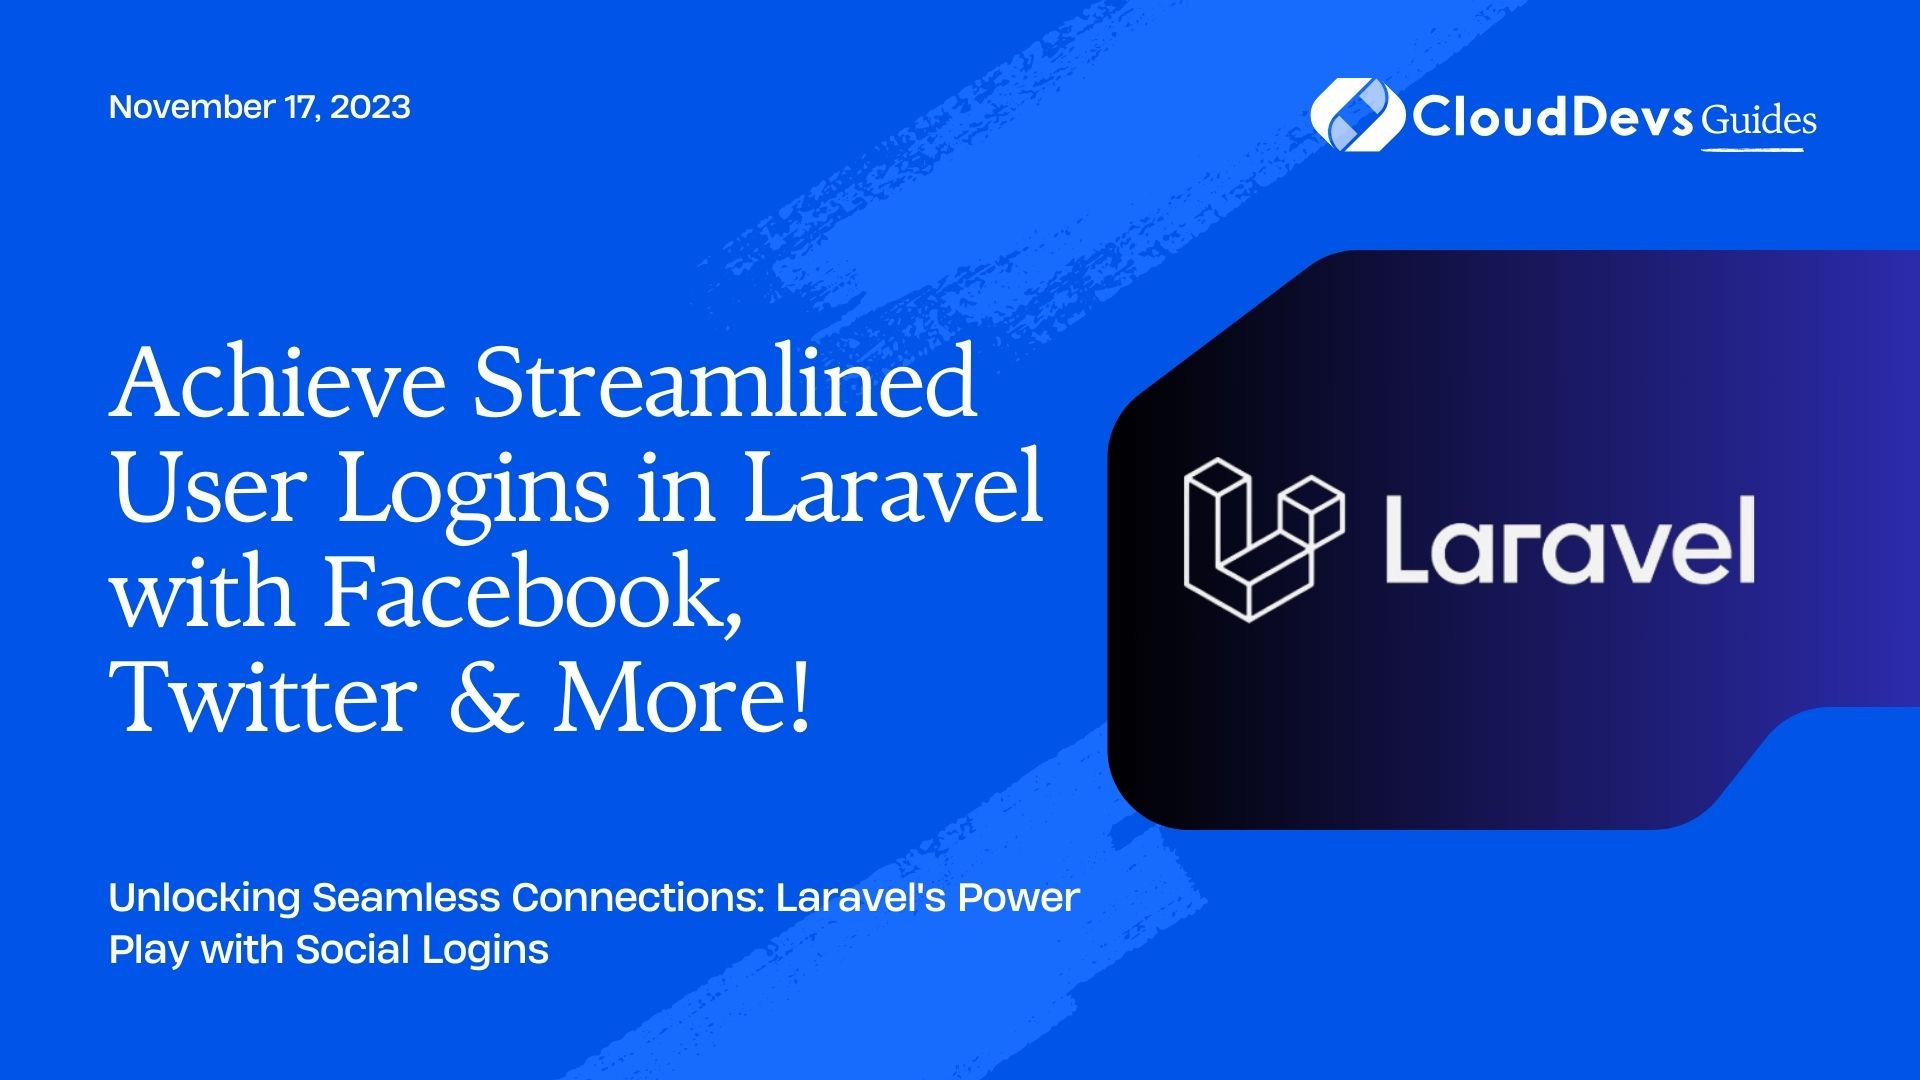 Achieve Streamlined User Logins in Laravel with Facebook, Twitter & More!